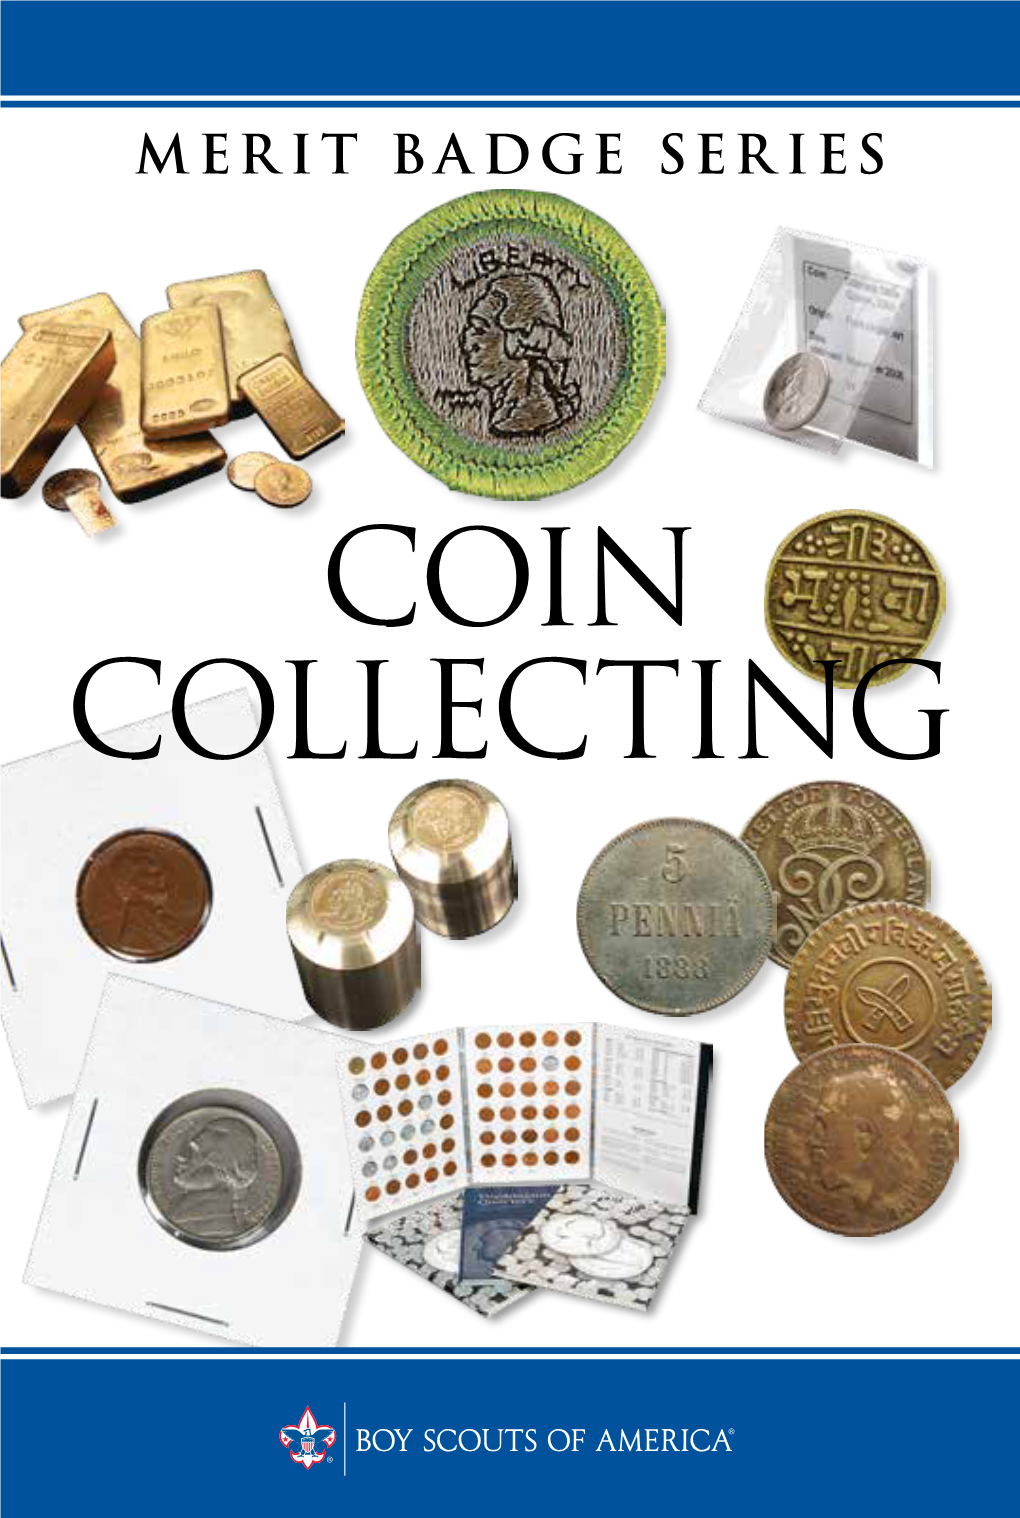 Coin Collecting Boy Scouts of America Merit Badge Series